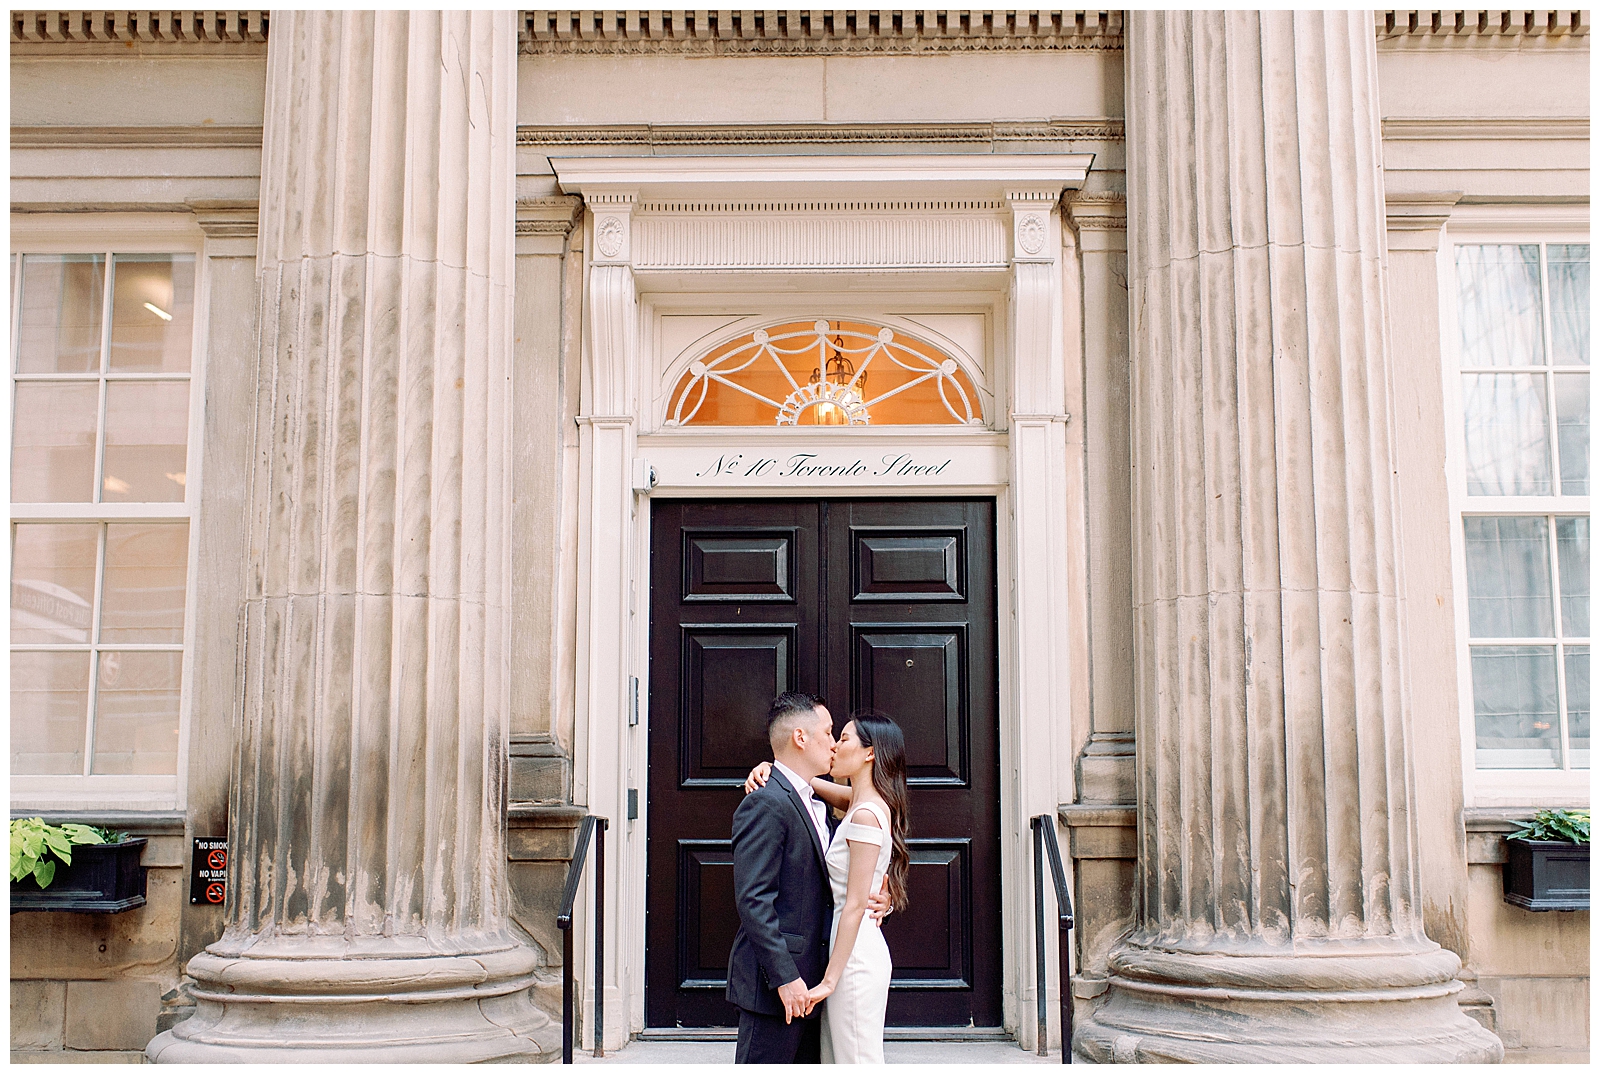 Downtown Toronto Financial District Engagement Session Modern Chic Timeless Couple Embracing in Front of Beautiful Door | Toronto Wedding Photography Jacqueline James Photography